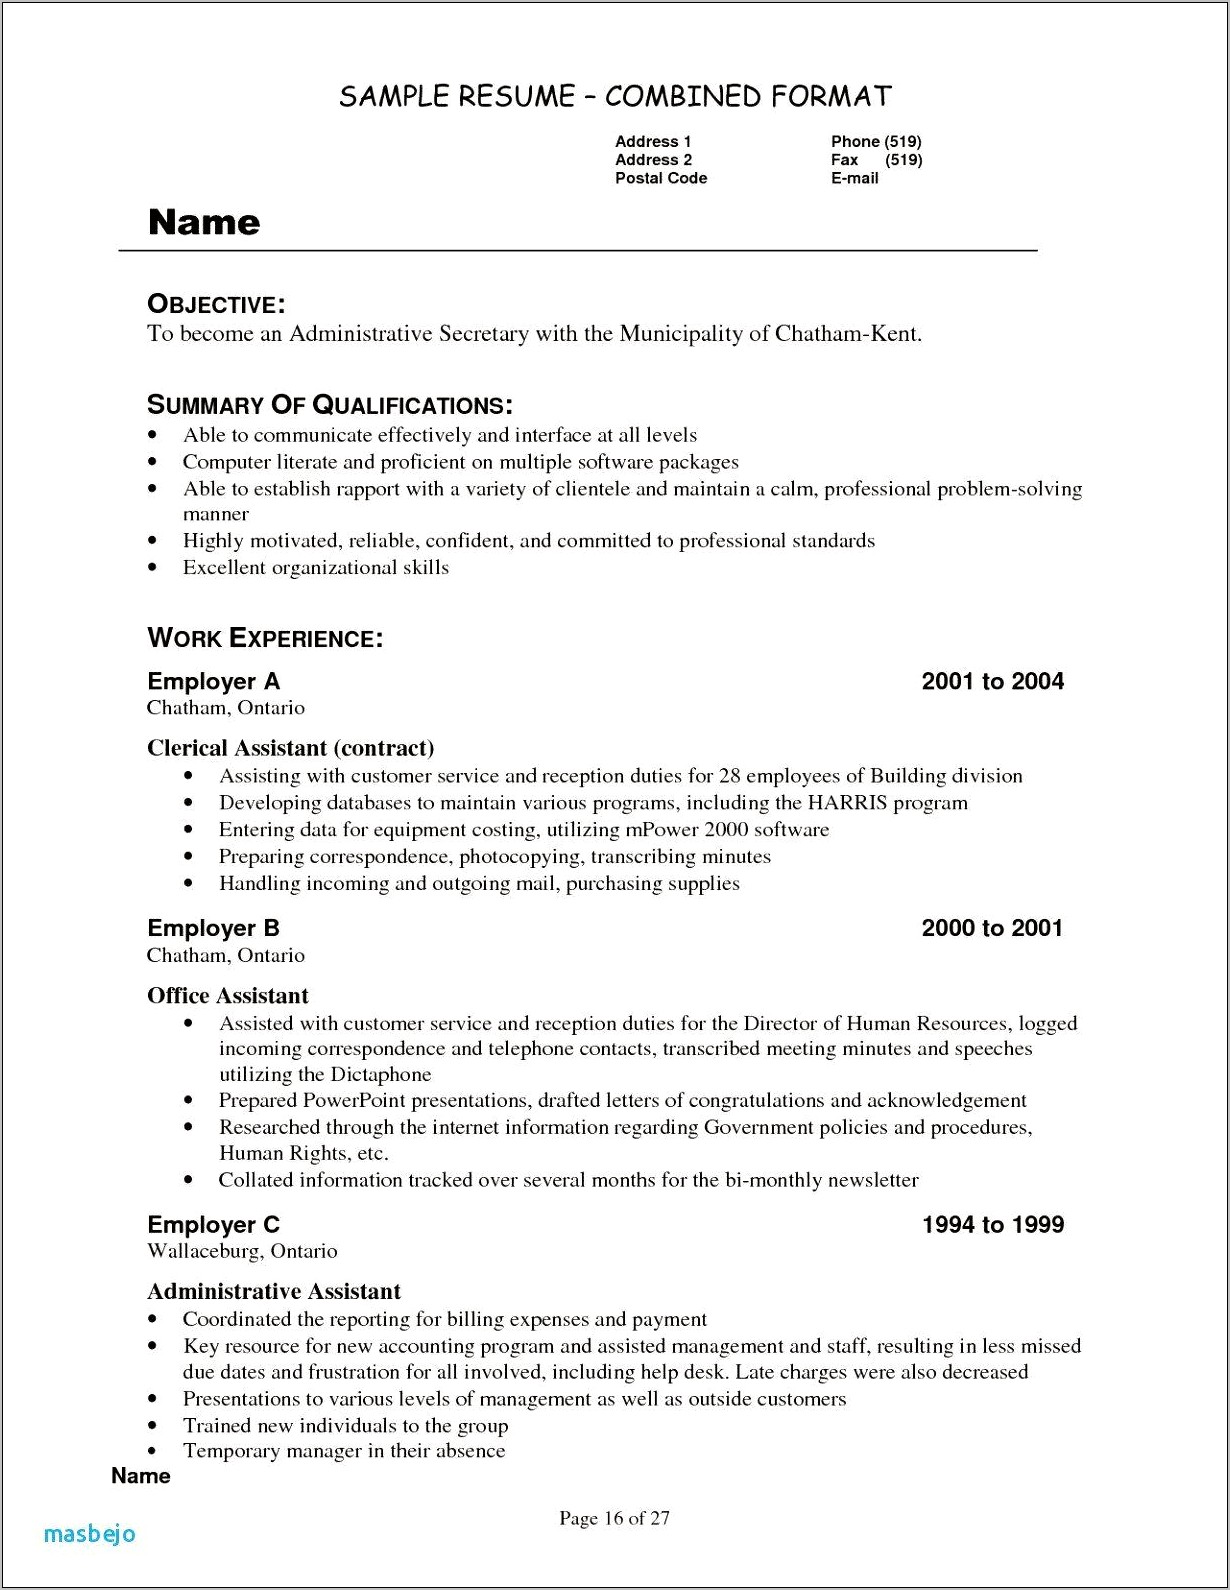 Examples Of Summary For Receptionist Resume Skills